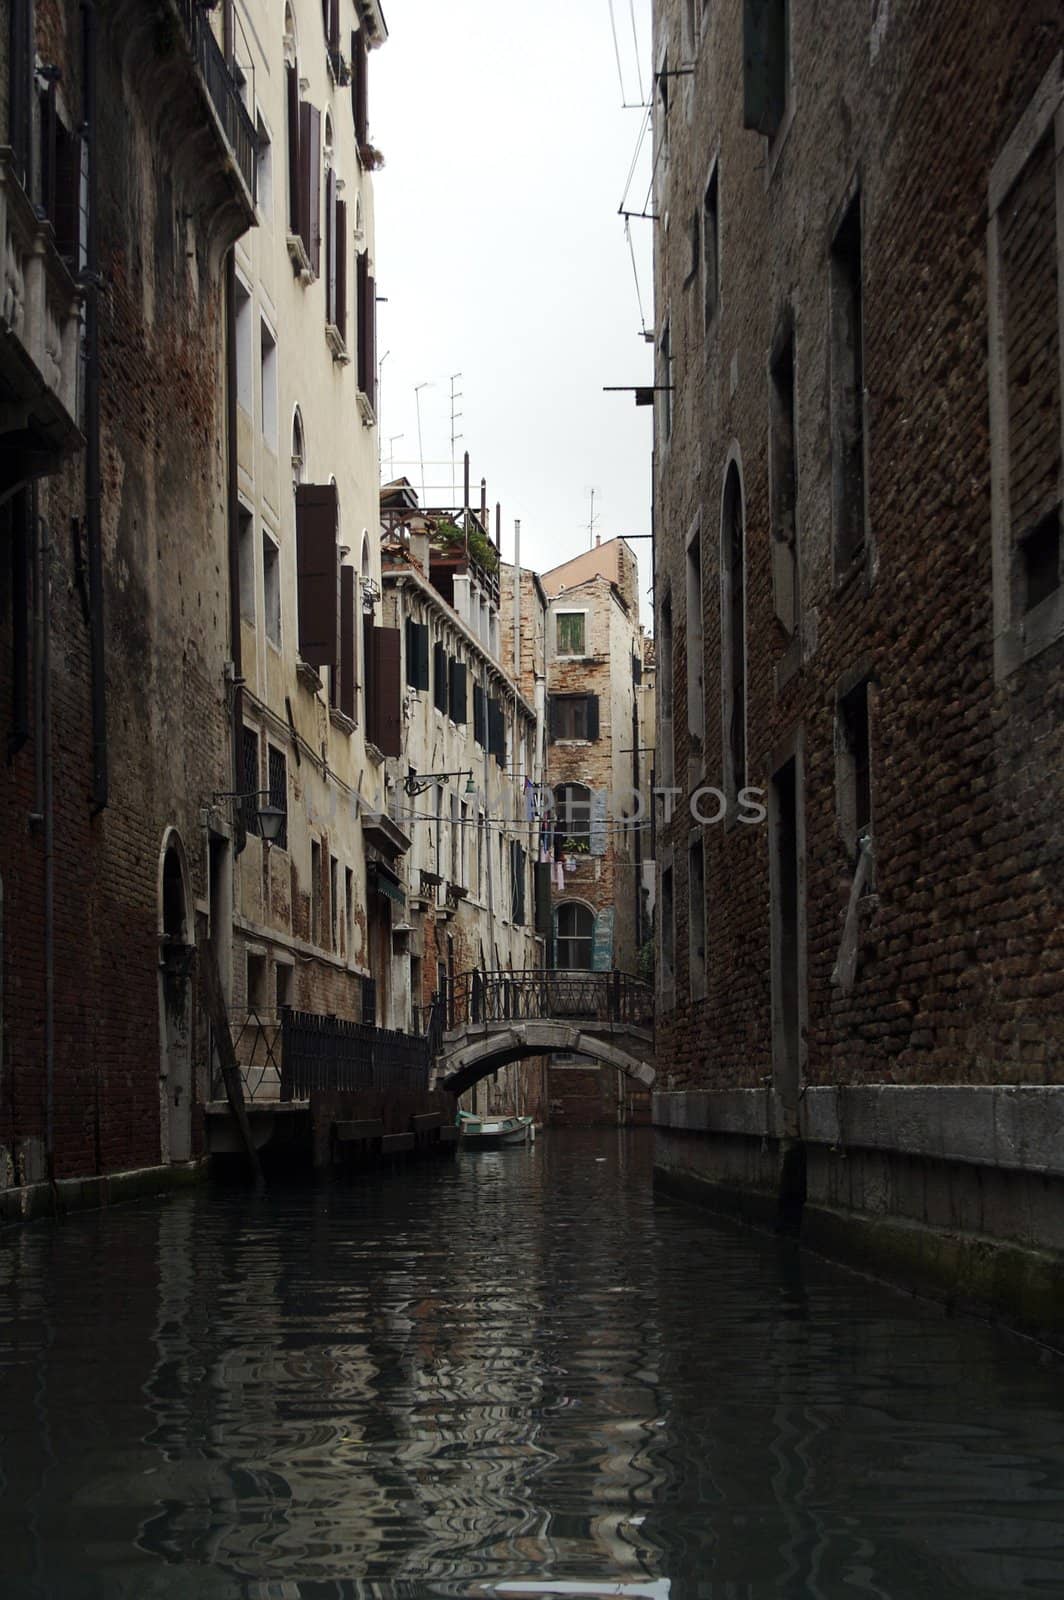 Narrow canal between old medieval houses in Venice